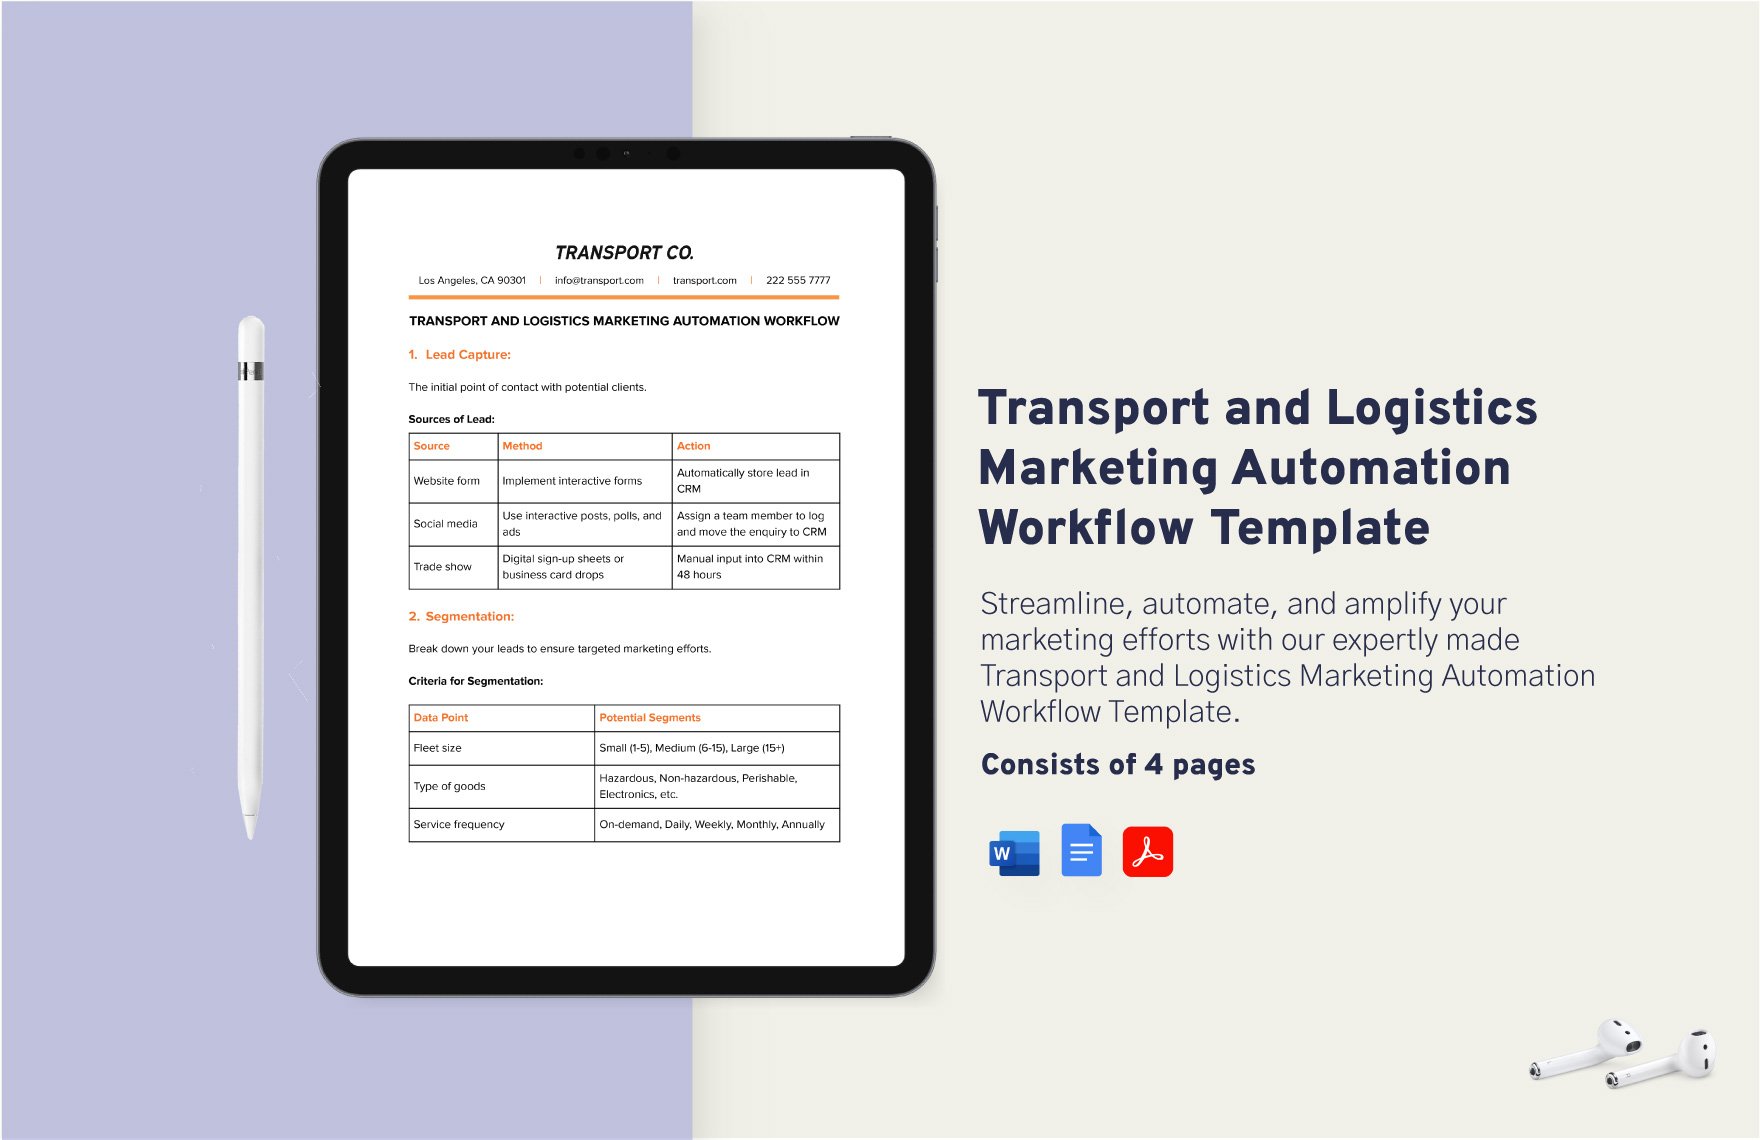 Transport and Logistics Marketing Automation Workflow Template